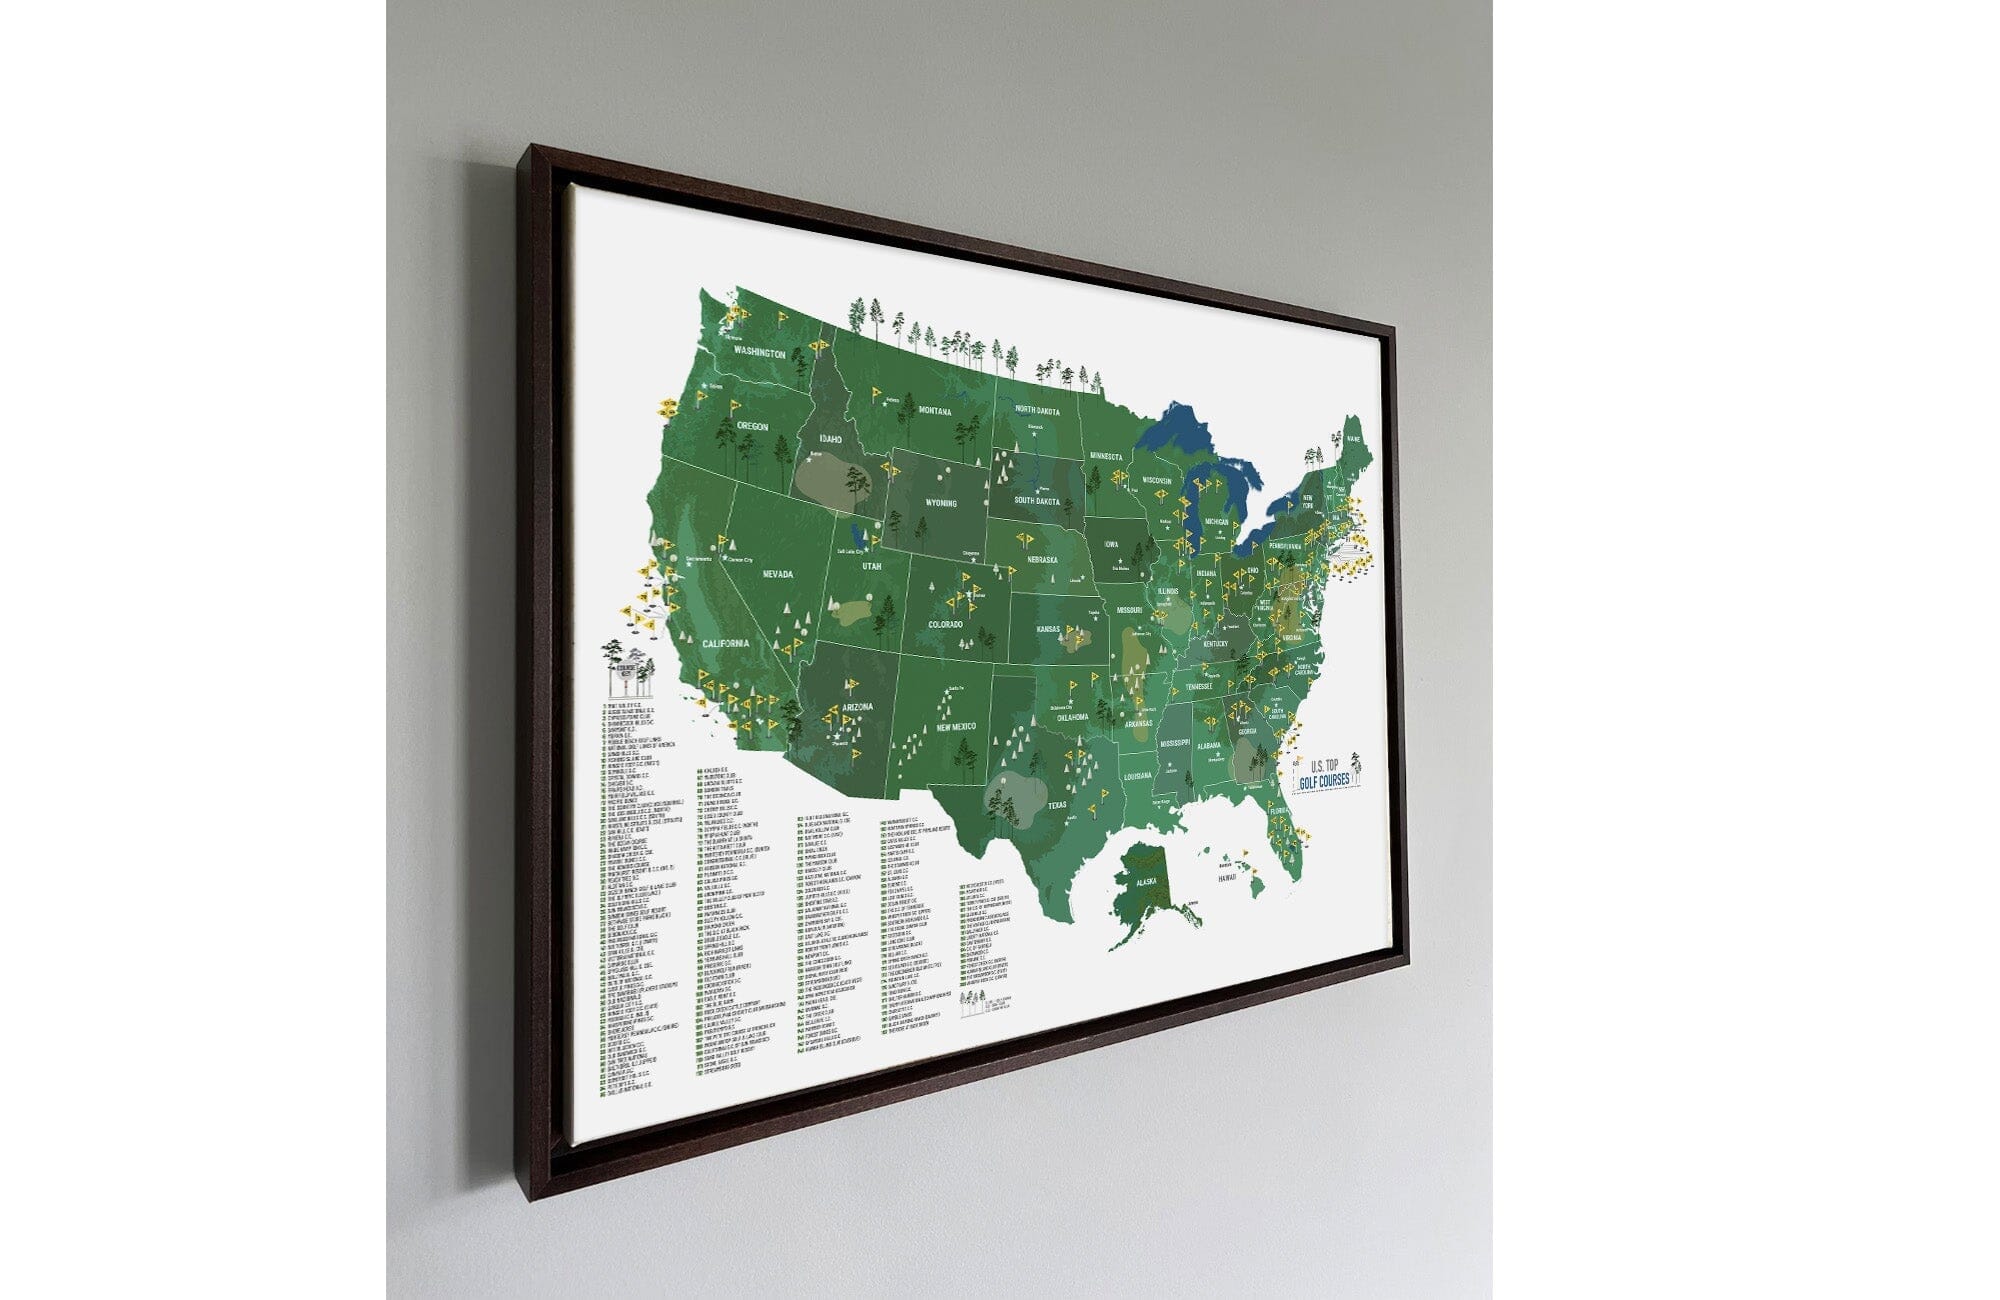 Golf Map of USA, BLACK FRAMED CANVAS, Push Pin Board, Top 200 COURSES Map OrderDesk 18X24 Green 